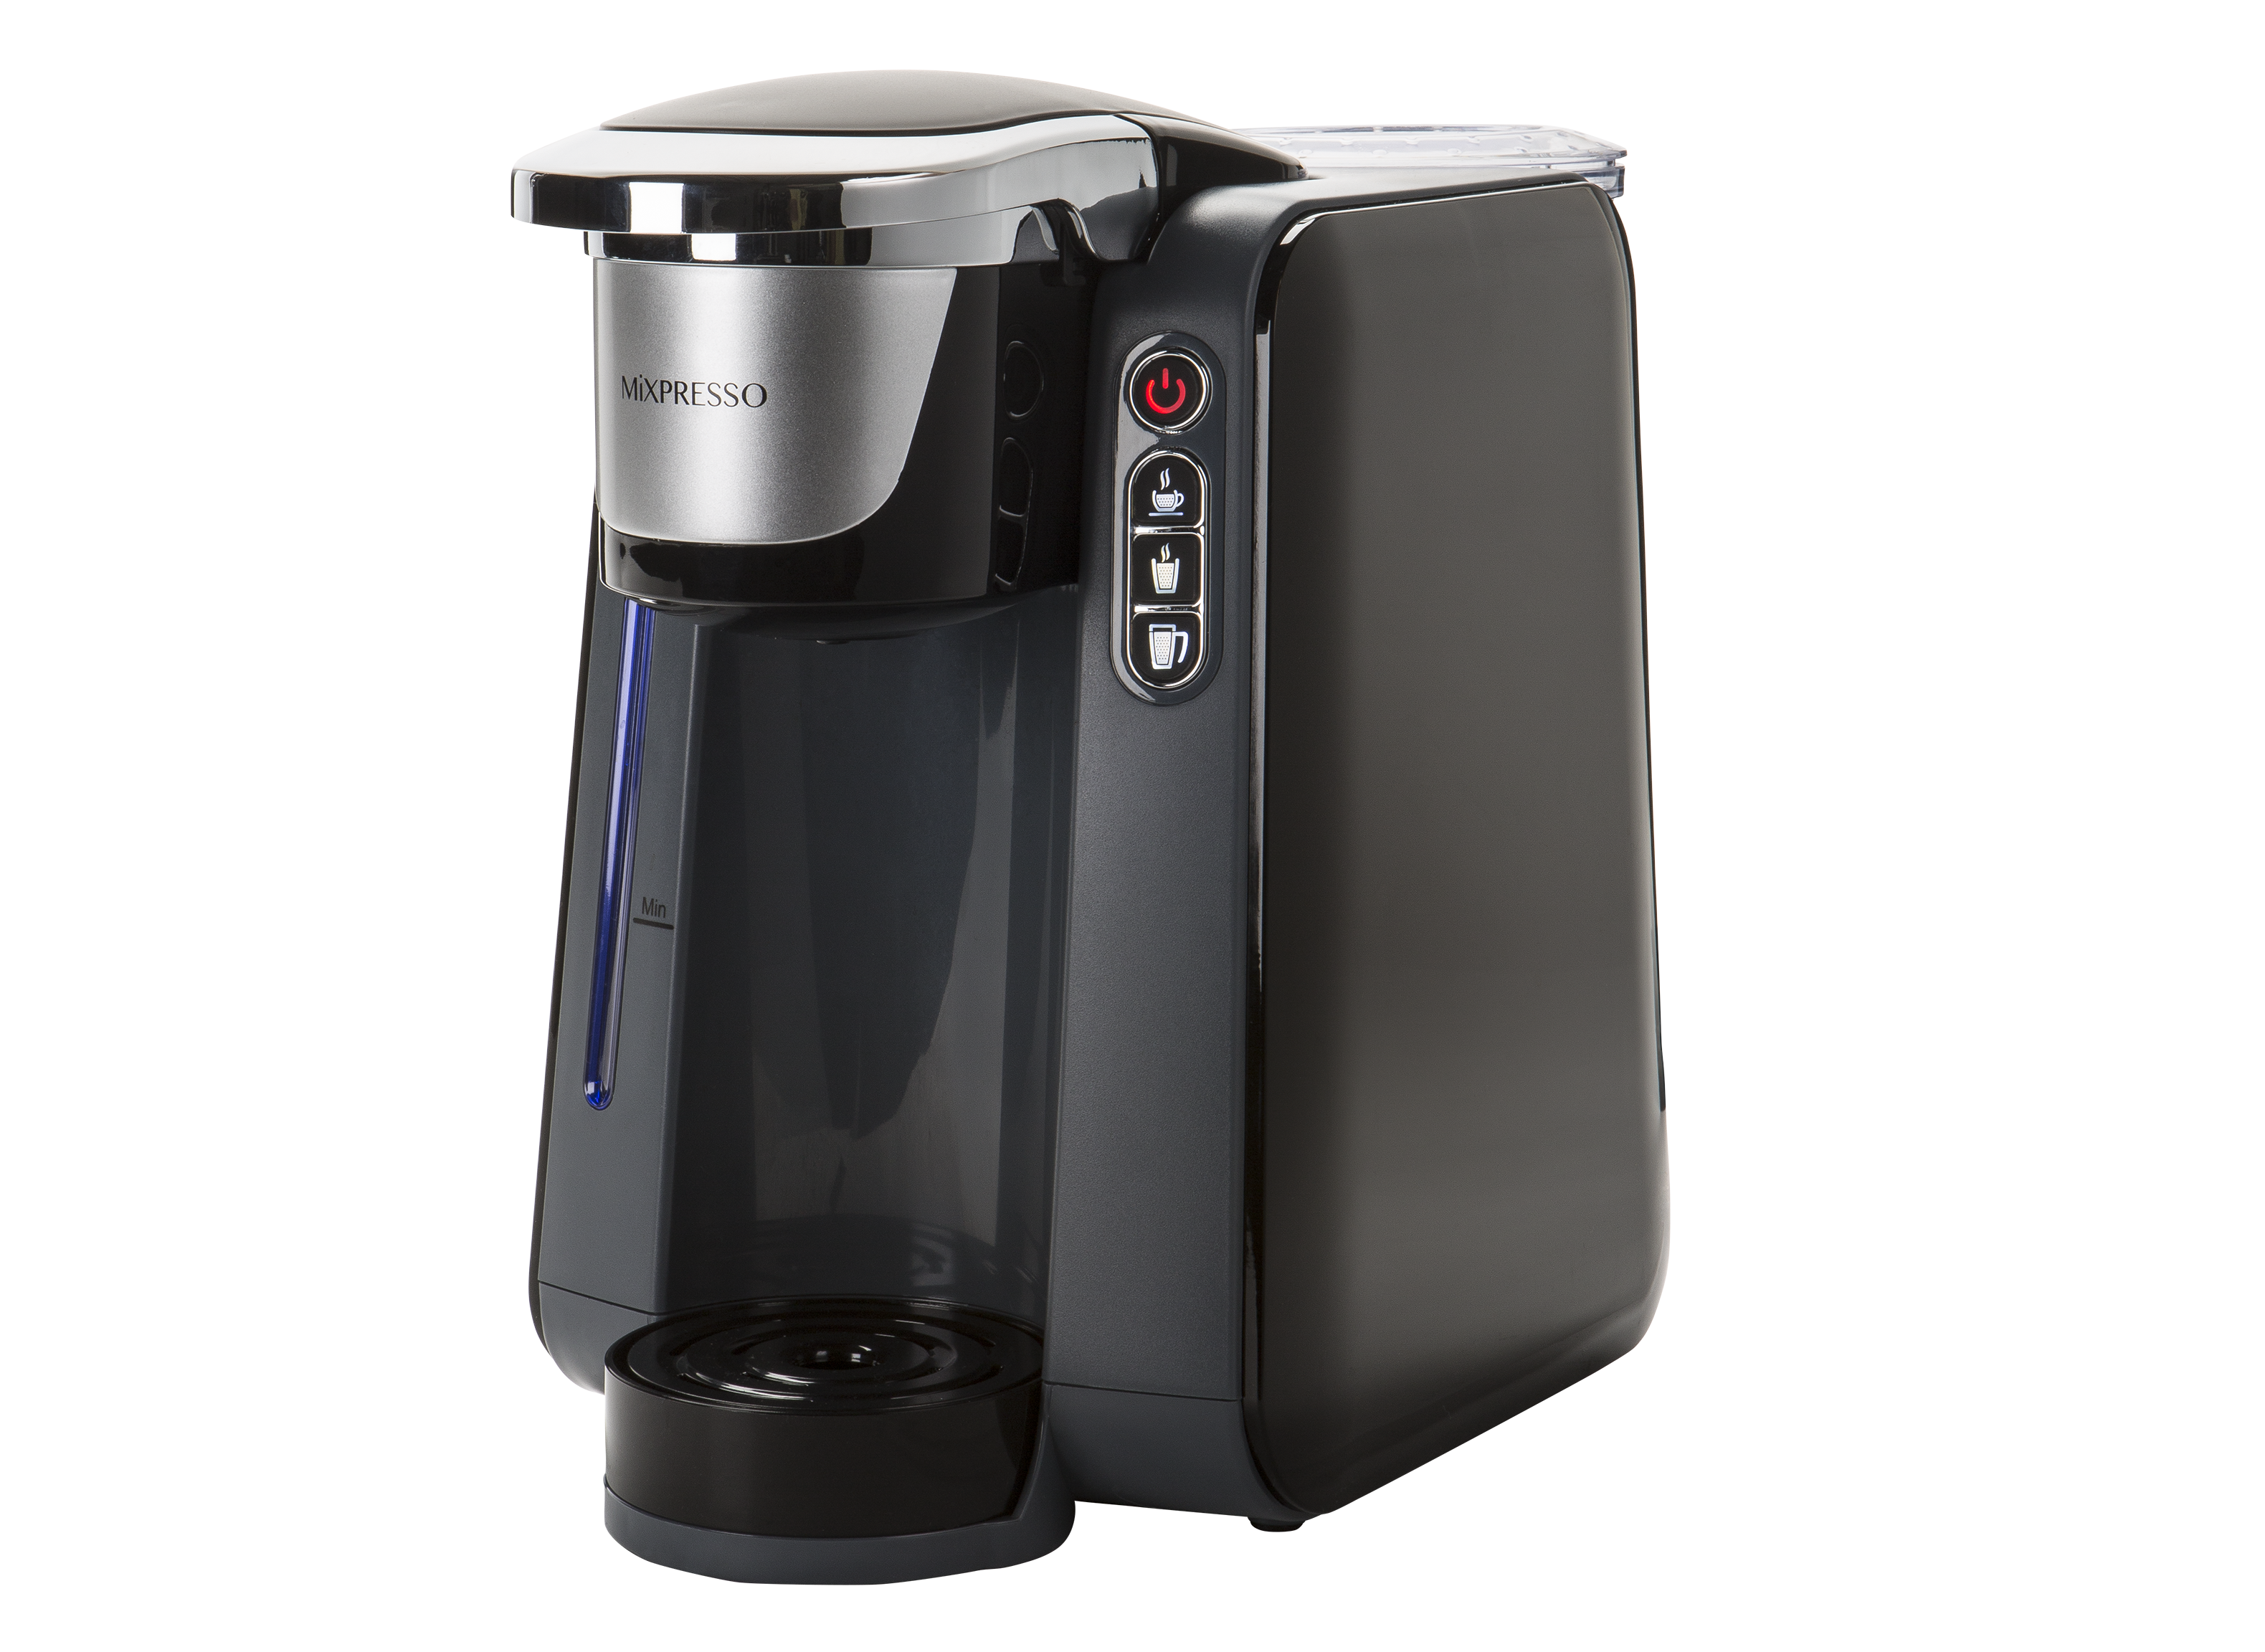 https://crdms.images.consumerreports.org/prod/products/cr/models/388841-singleservecoffeemakers-mixpresso-singlecupk4gry00.png